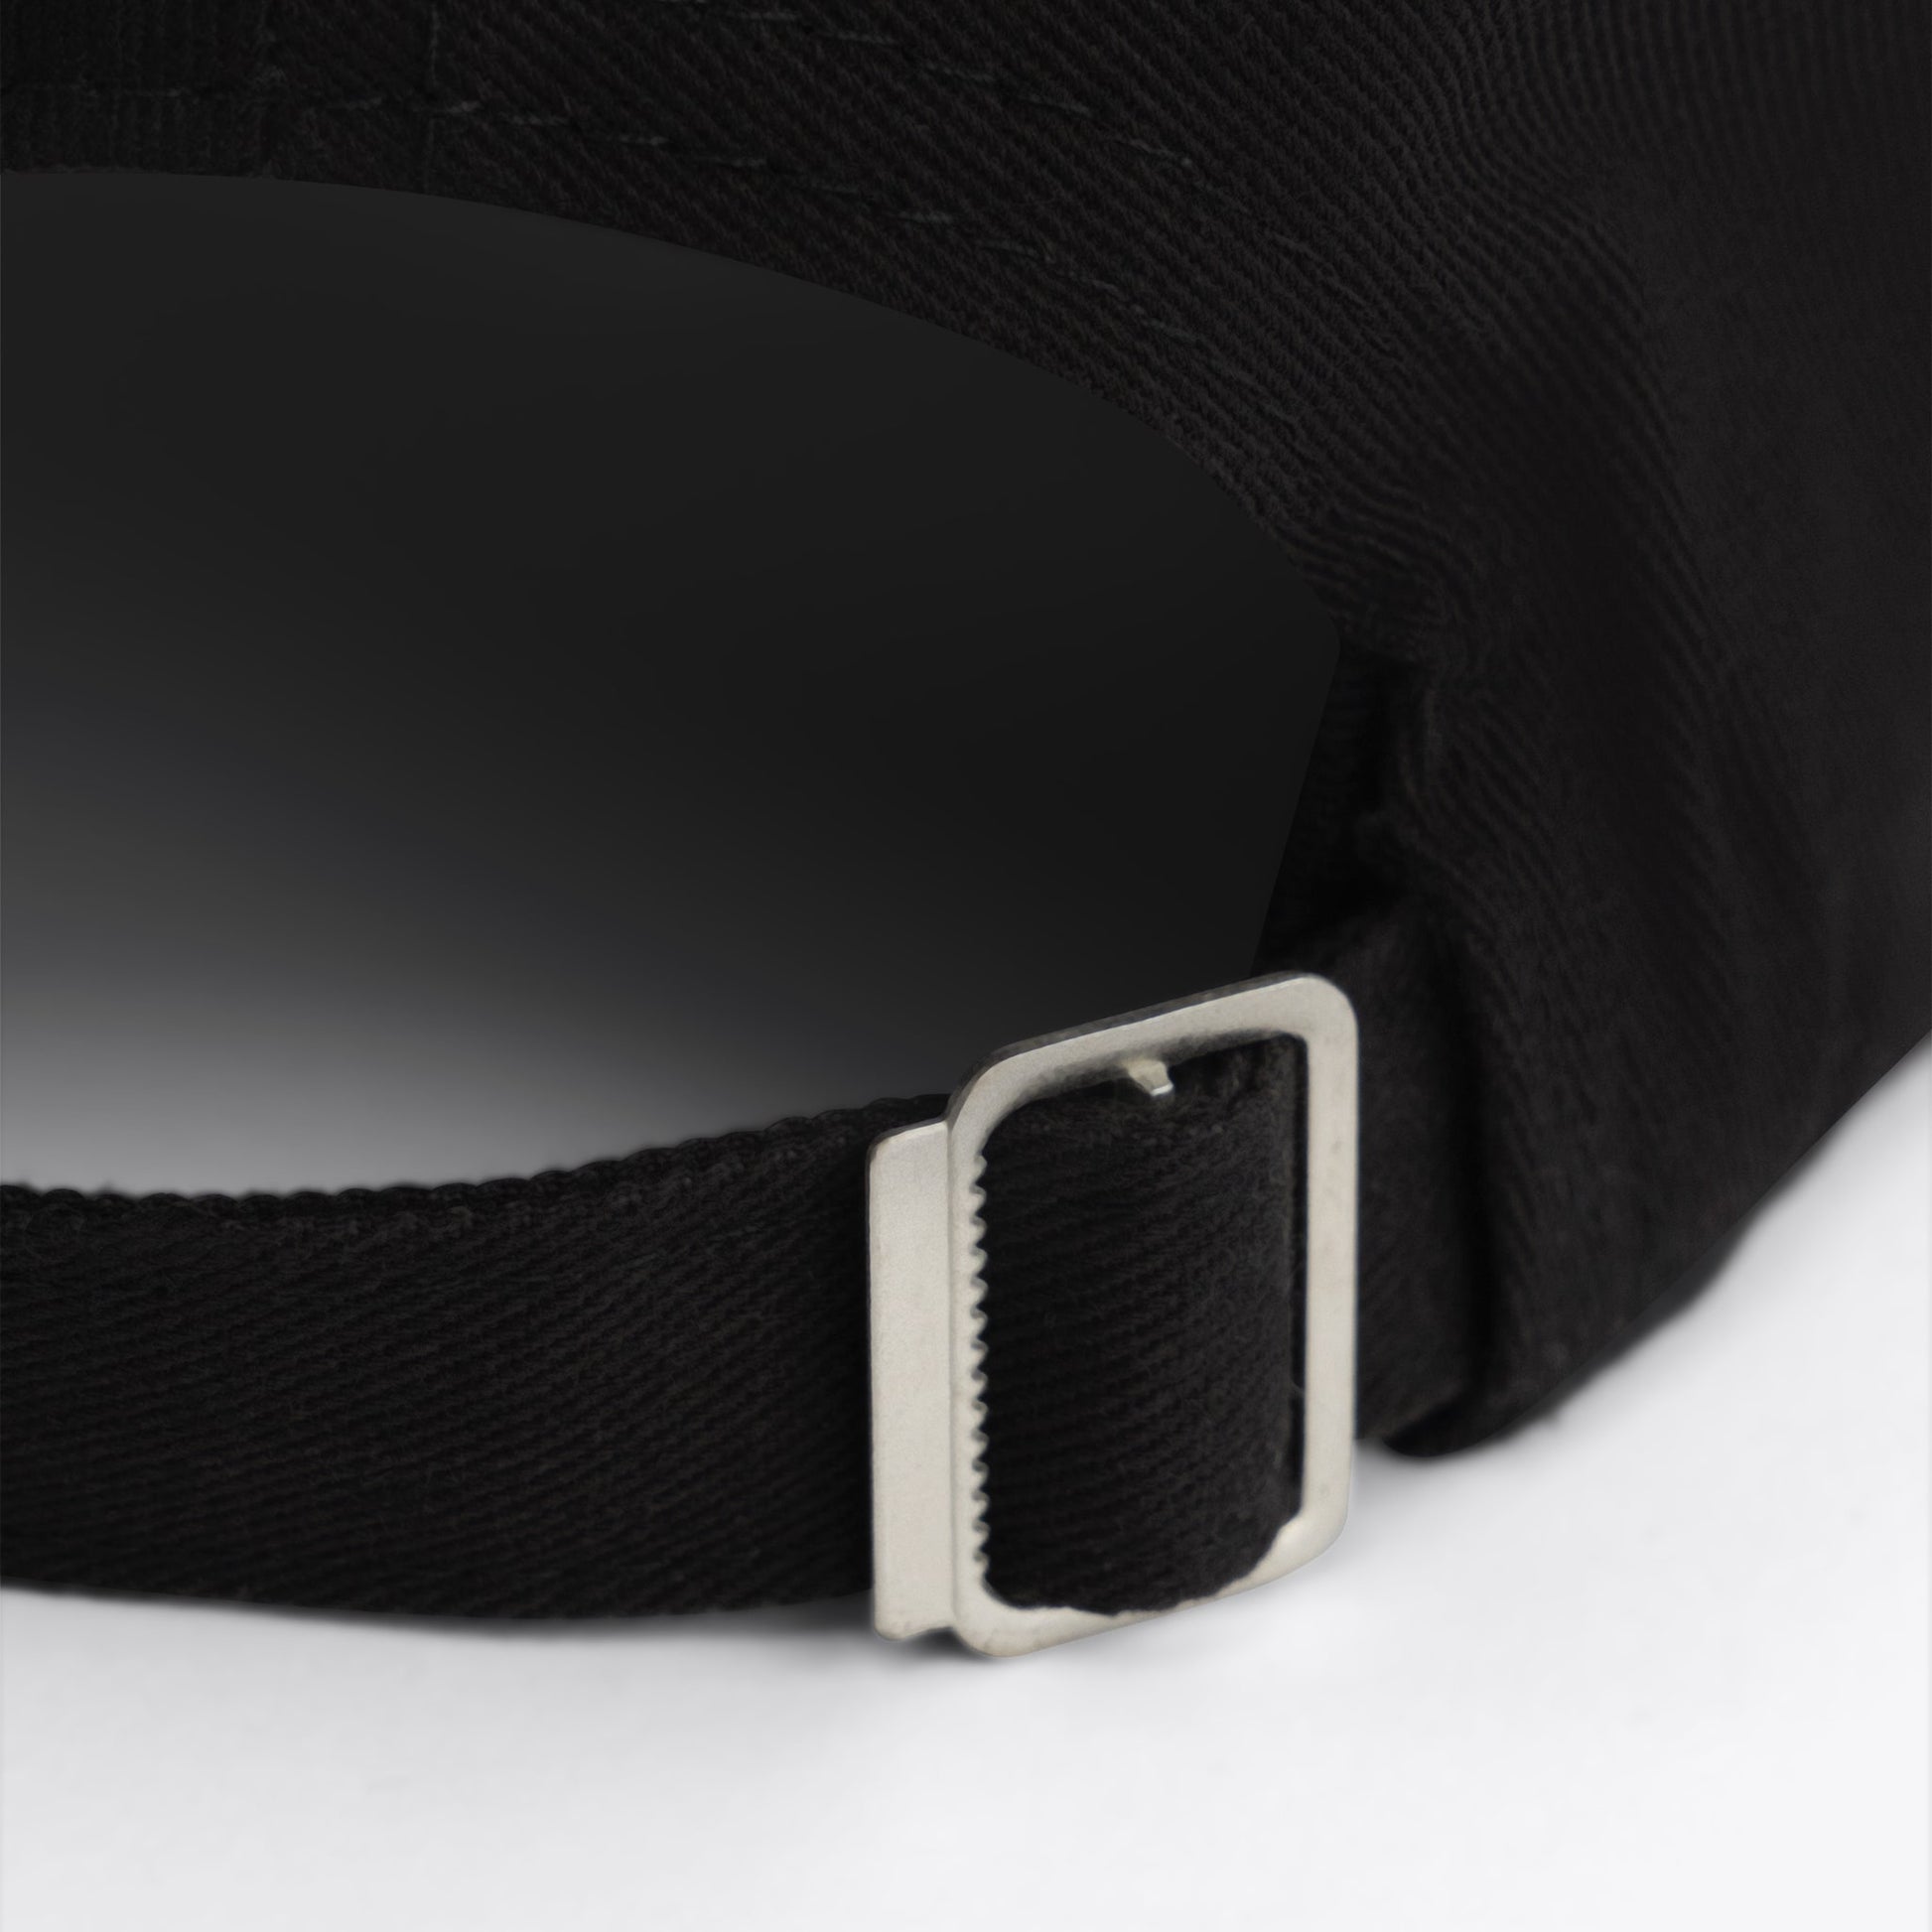 Black-on-black embroidered GROOM baseball hat comes with an adjustable brass buckle. Made of 100% cotton twill.